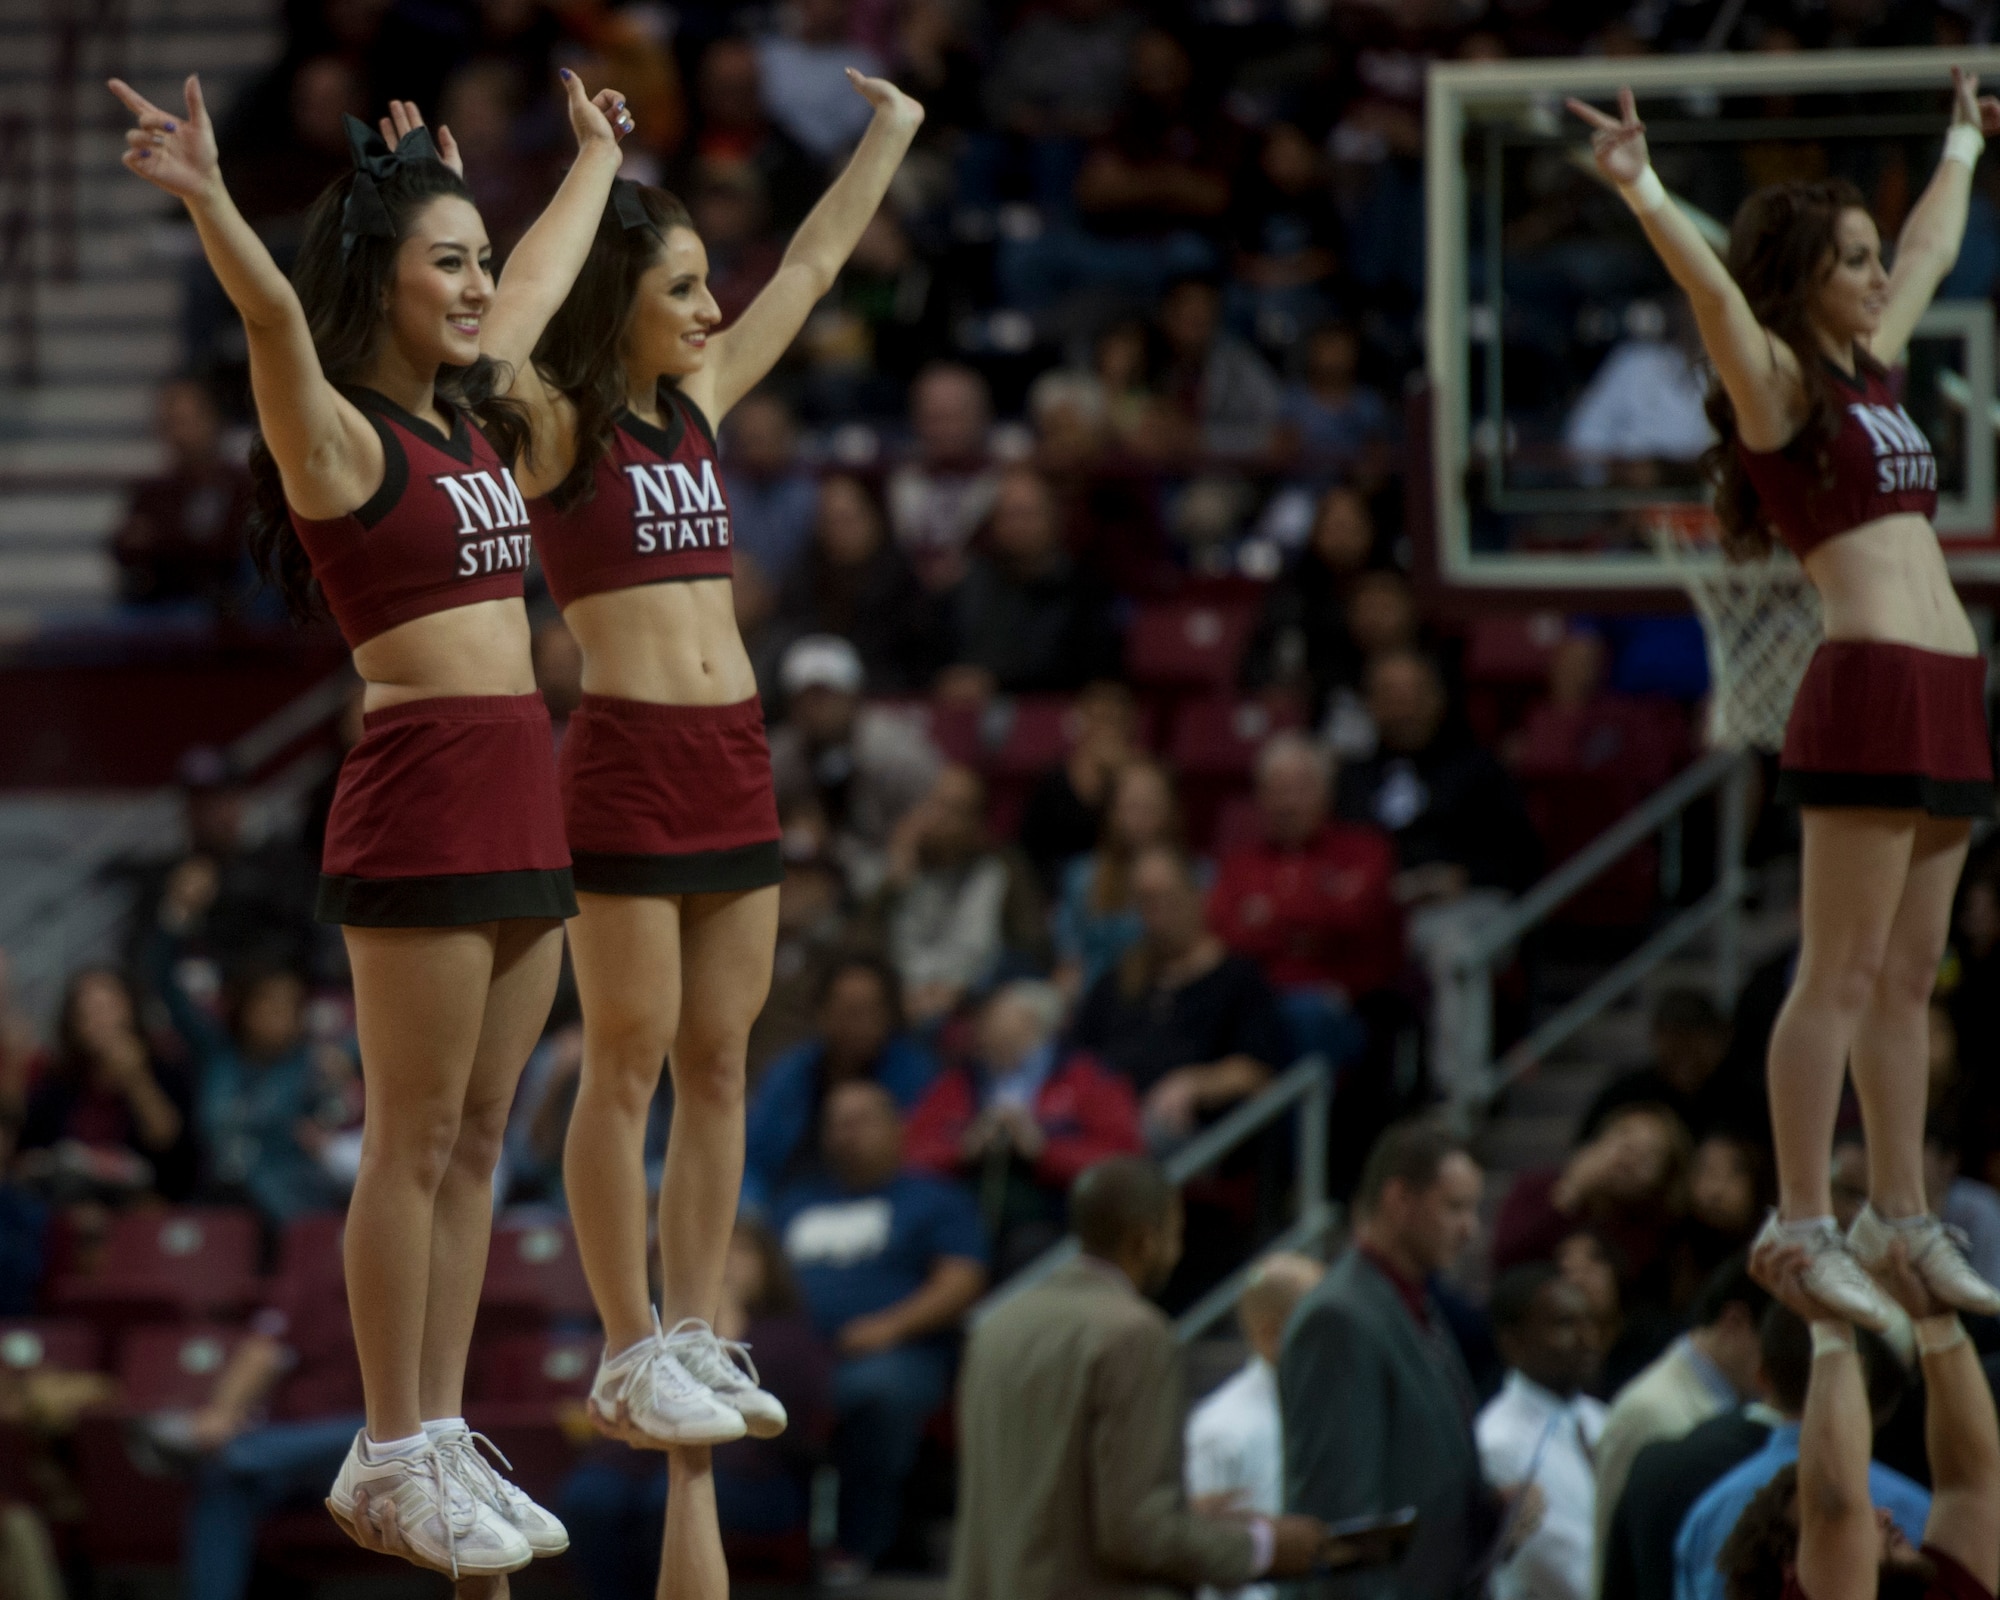 New Mexico State Aggies cheerleaders perform during an intermission at the Pan American Center in Las Cruces, N.M., Nov. 19. The Aggies compete in the Western Athletic Conference alongside several other schools in the region. Airmen can drive to the Pan American Center just an hour away from Holloman Air Force Base to enjoy the excitement of a live game atmosphere and to cheer on a team that’s appeared in the NCAA tournament the last three years running. (U.S. Air Force photo by Senior Airman Daniel E. F. Liddicoet/Released)